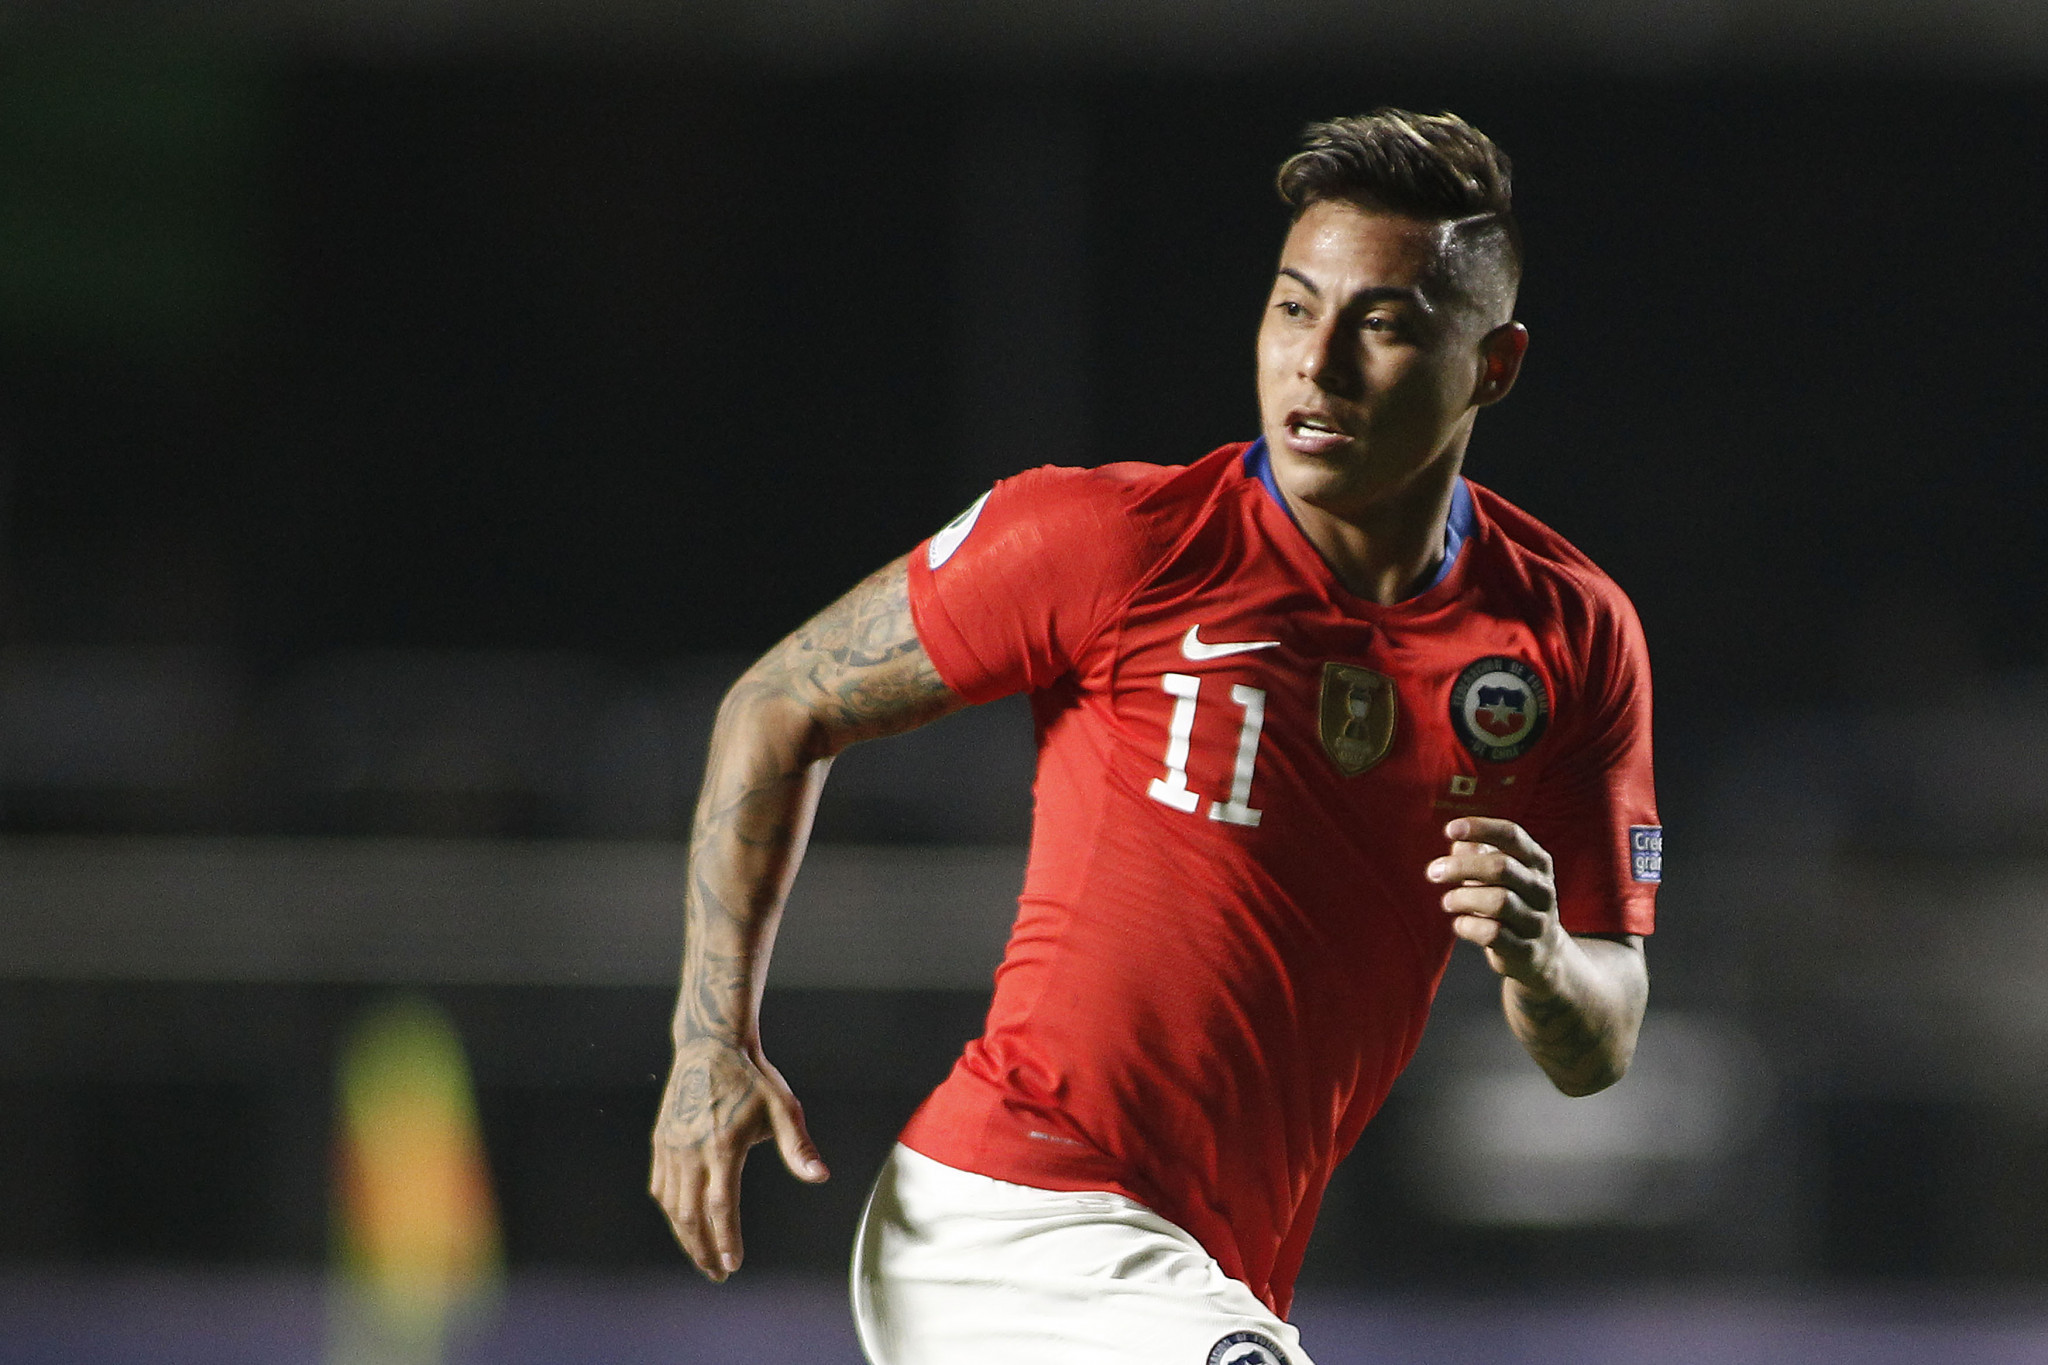 Striker Eduardo Vargas scored twice, becoming Chile's top scorer in Copa America history ©Getty Images